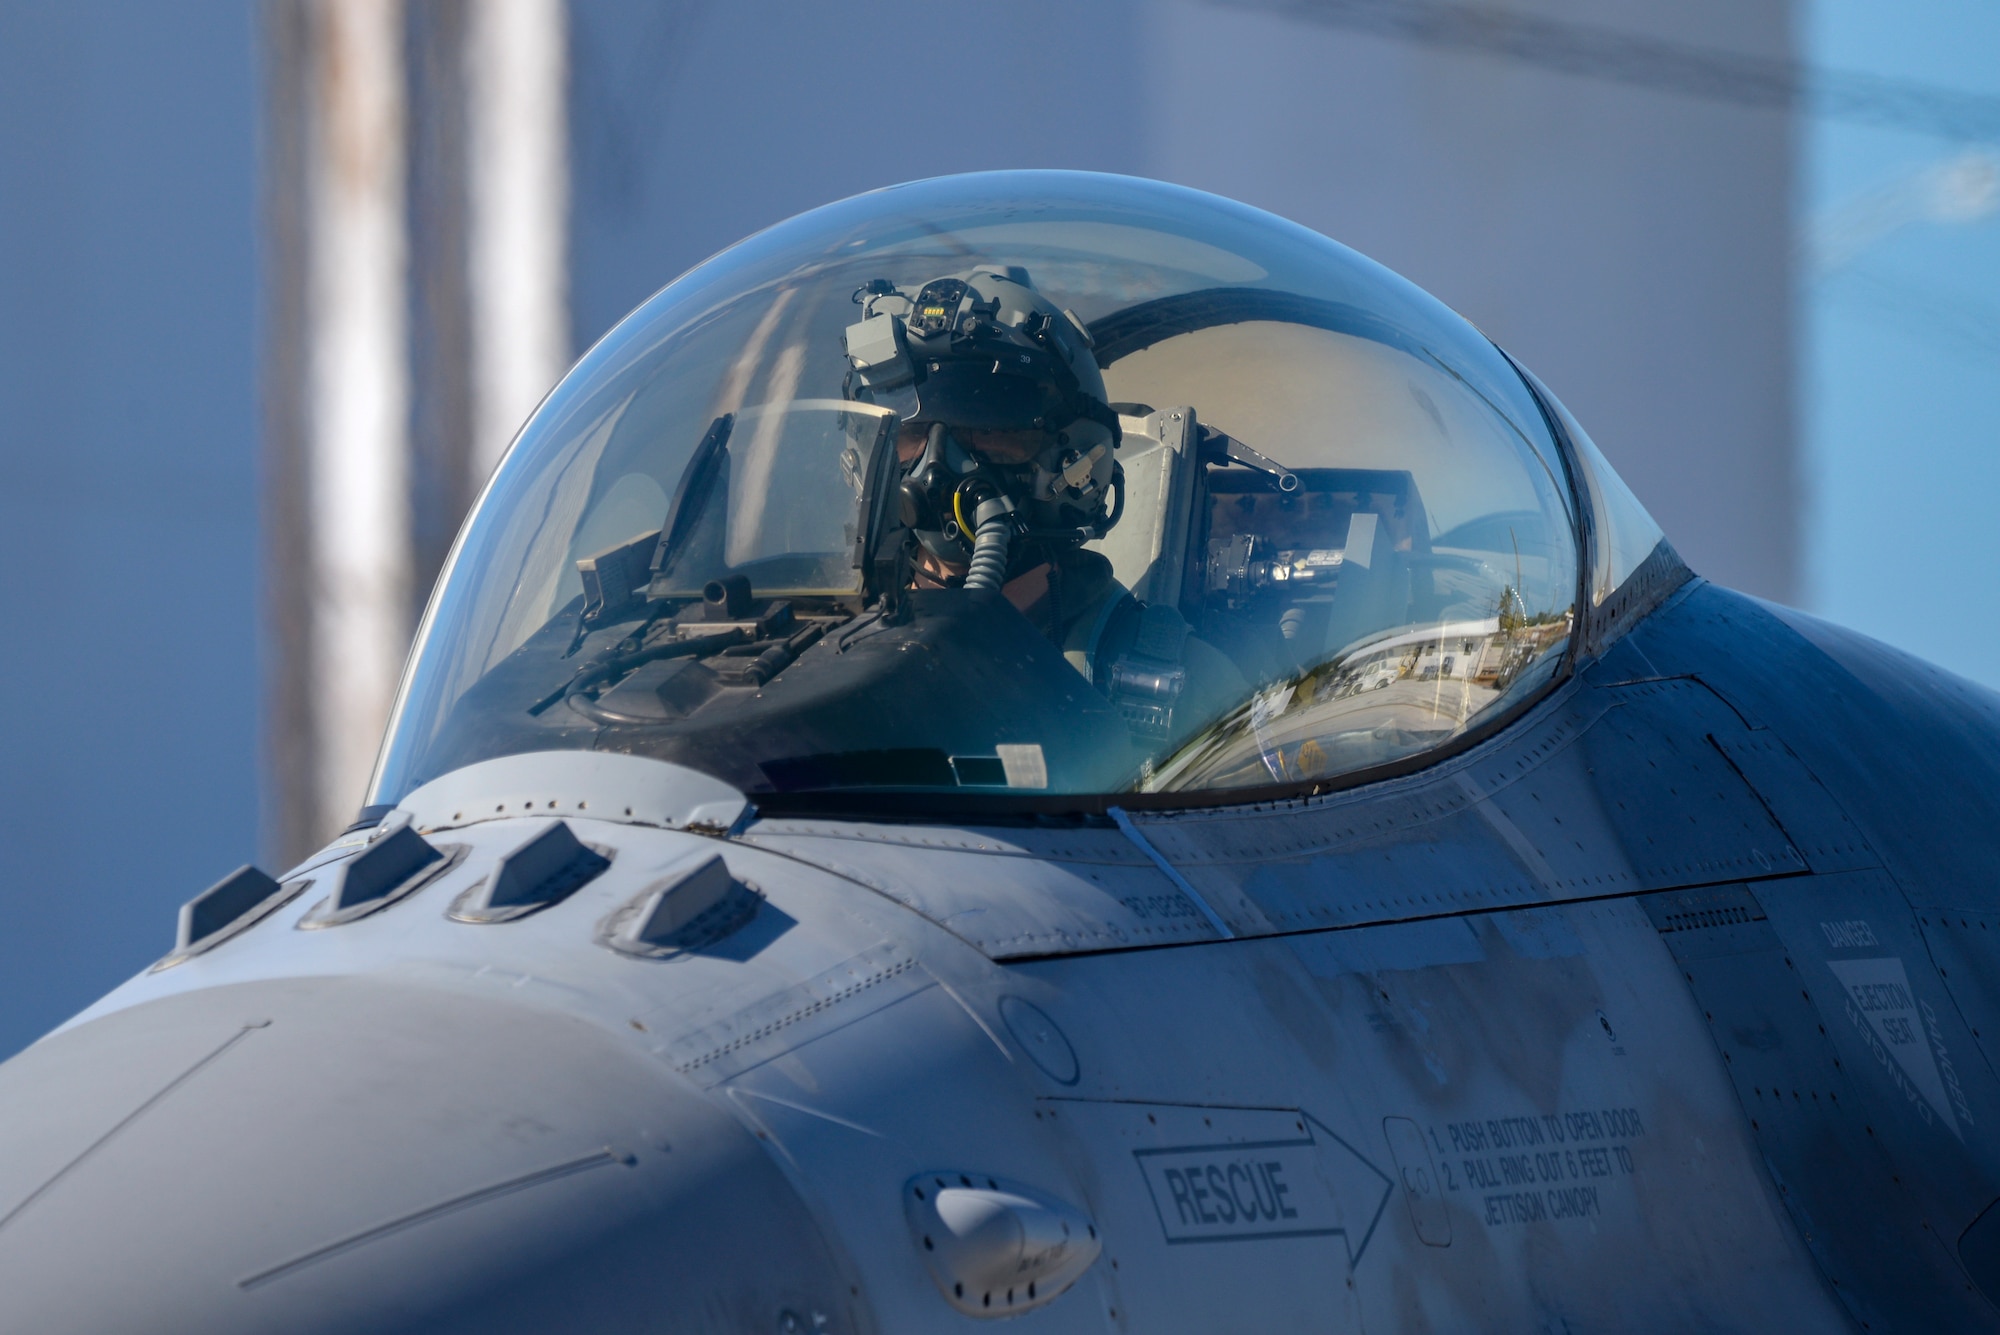 An image of an F-16 fighter pilot preparing to taxi